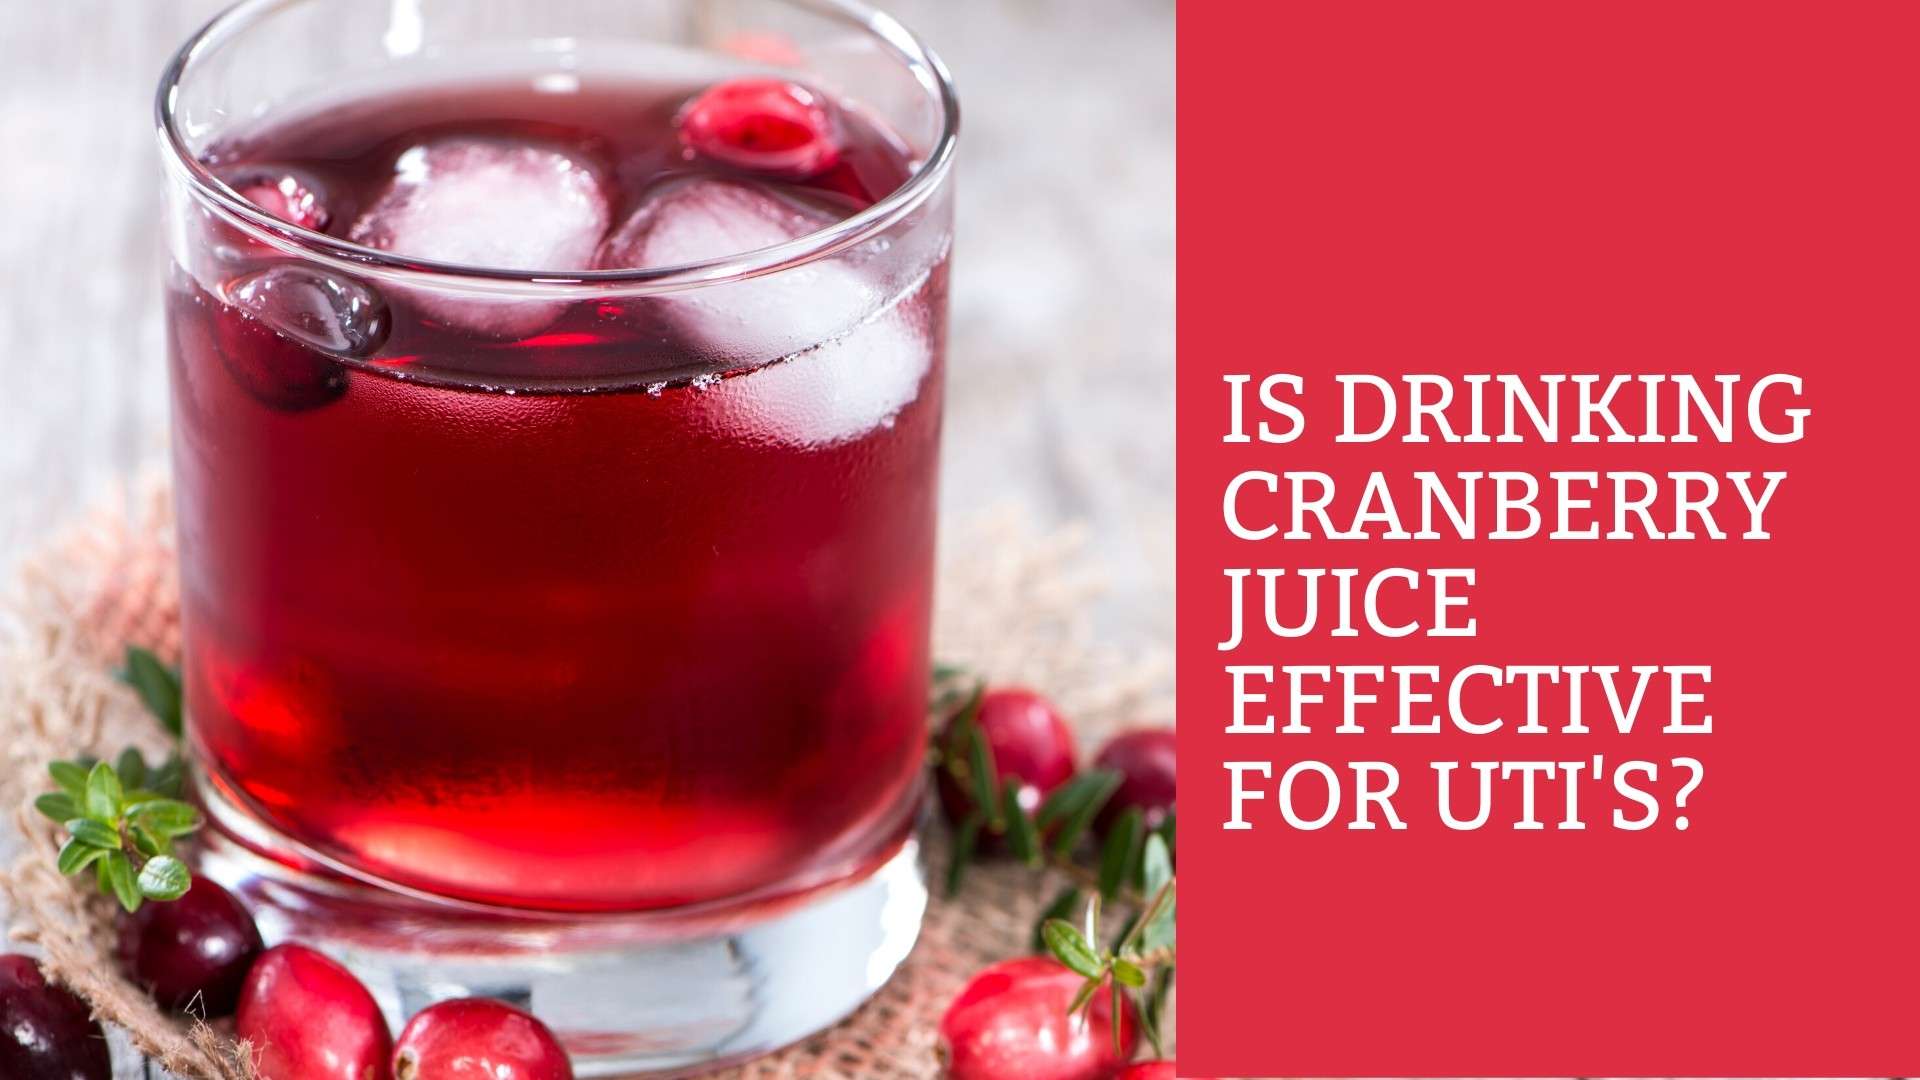 Read This Before You Grab that Cranberry Juice For Your UTI